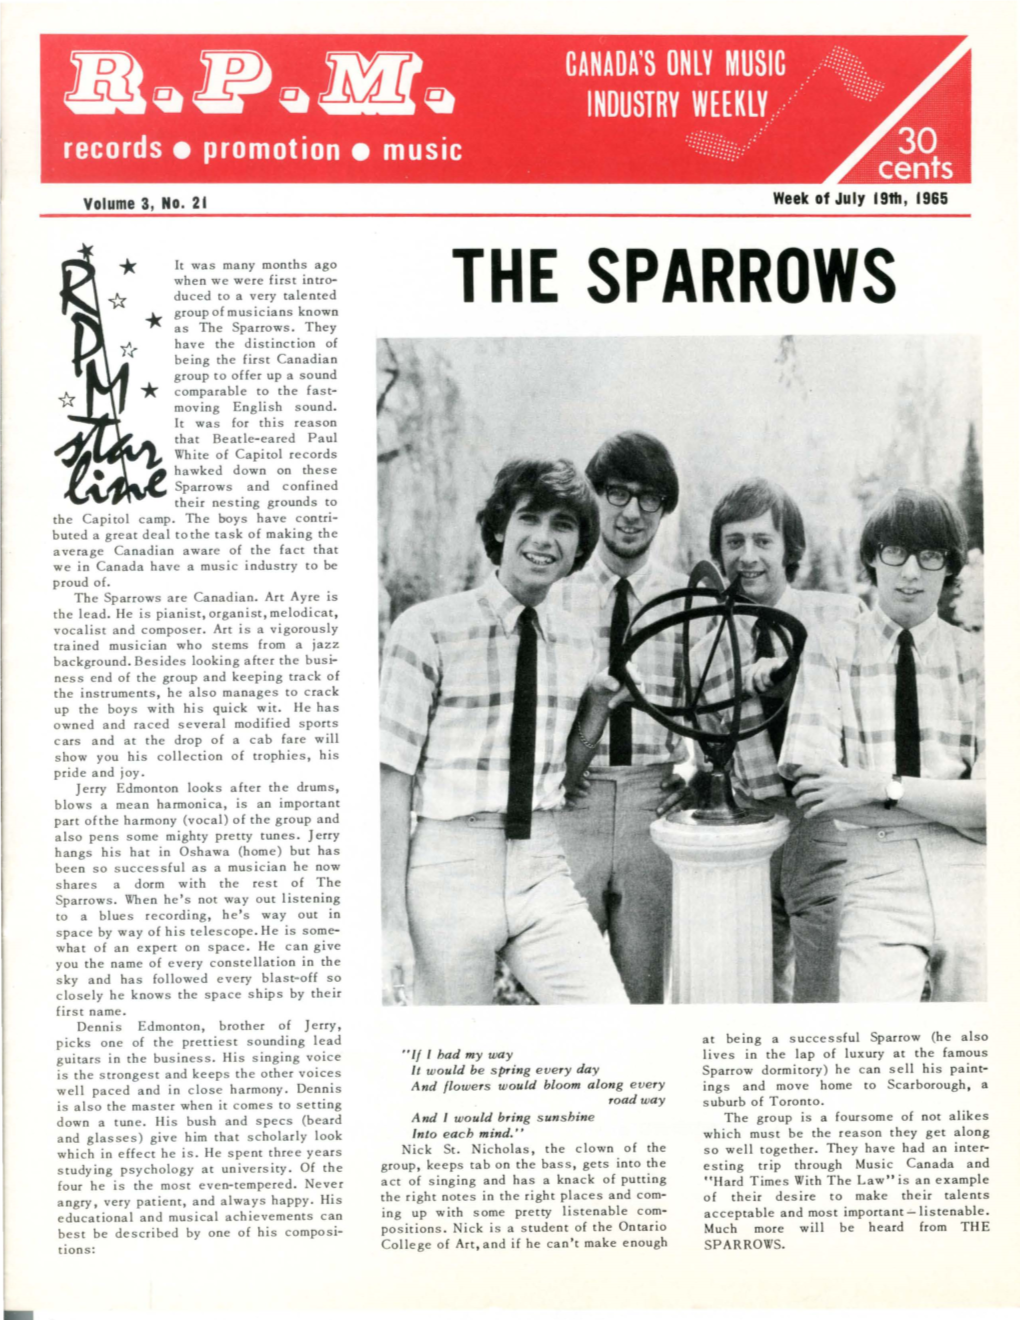 THE SPARROWS Group of Musicians Known As the Sparrows